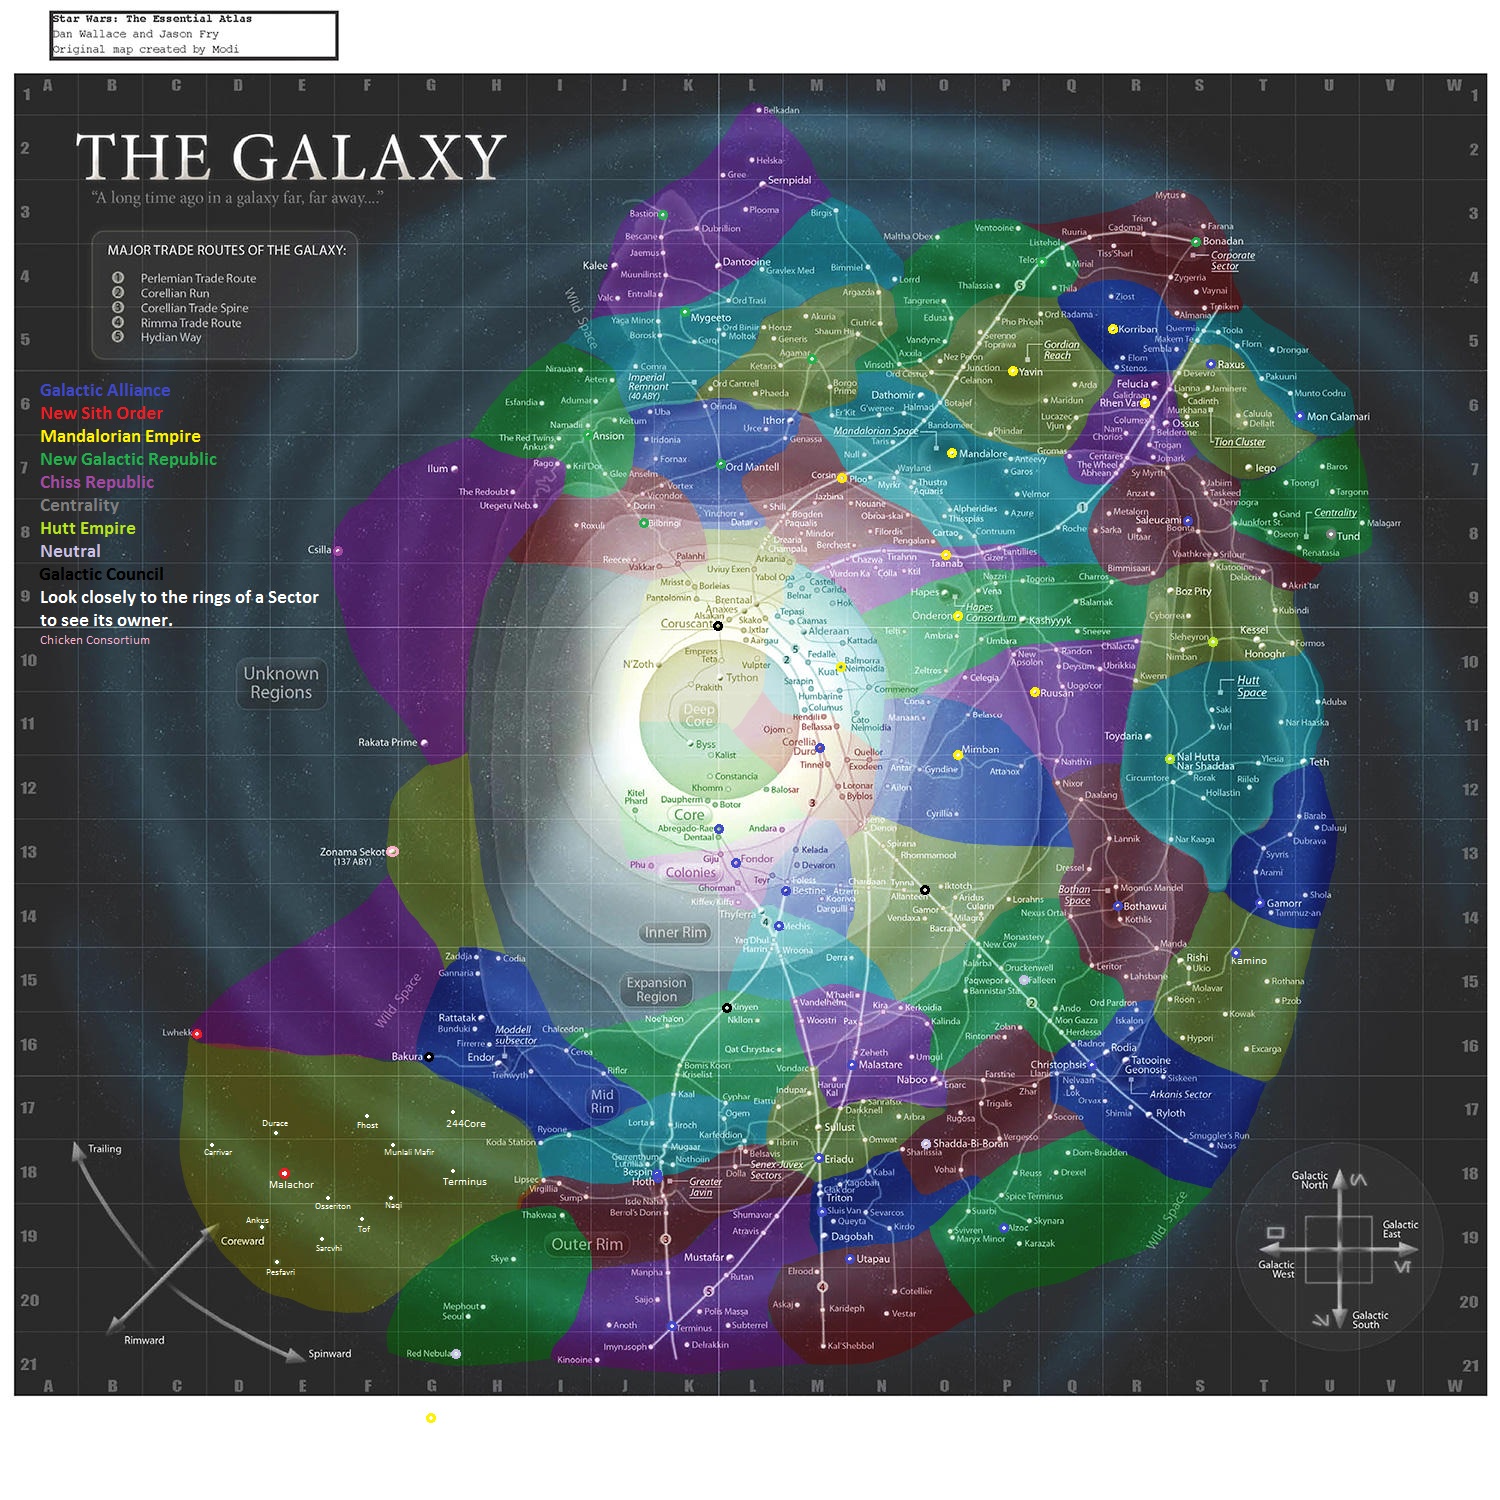 Slave lords of the galaxy